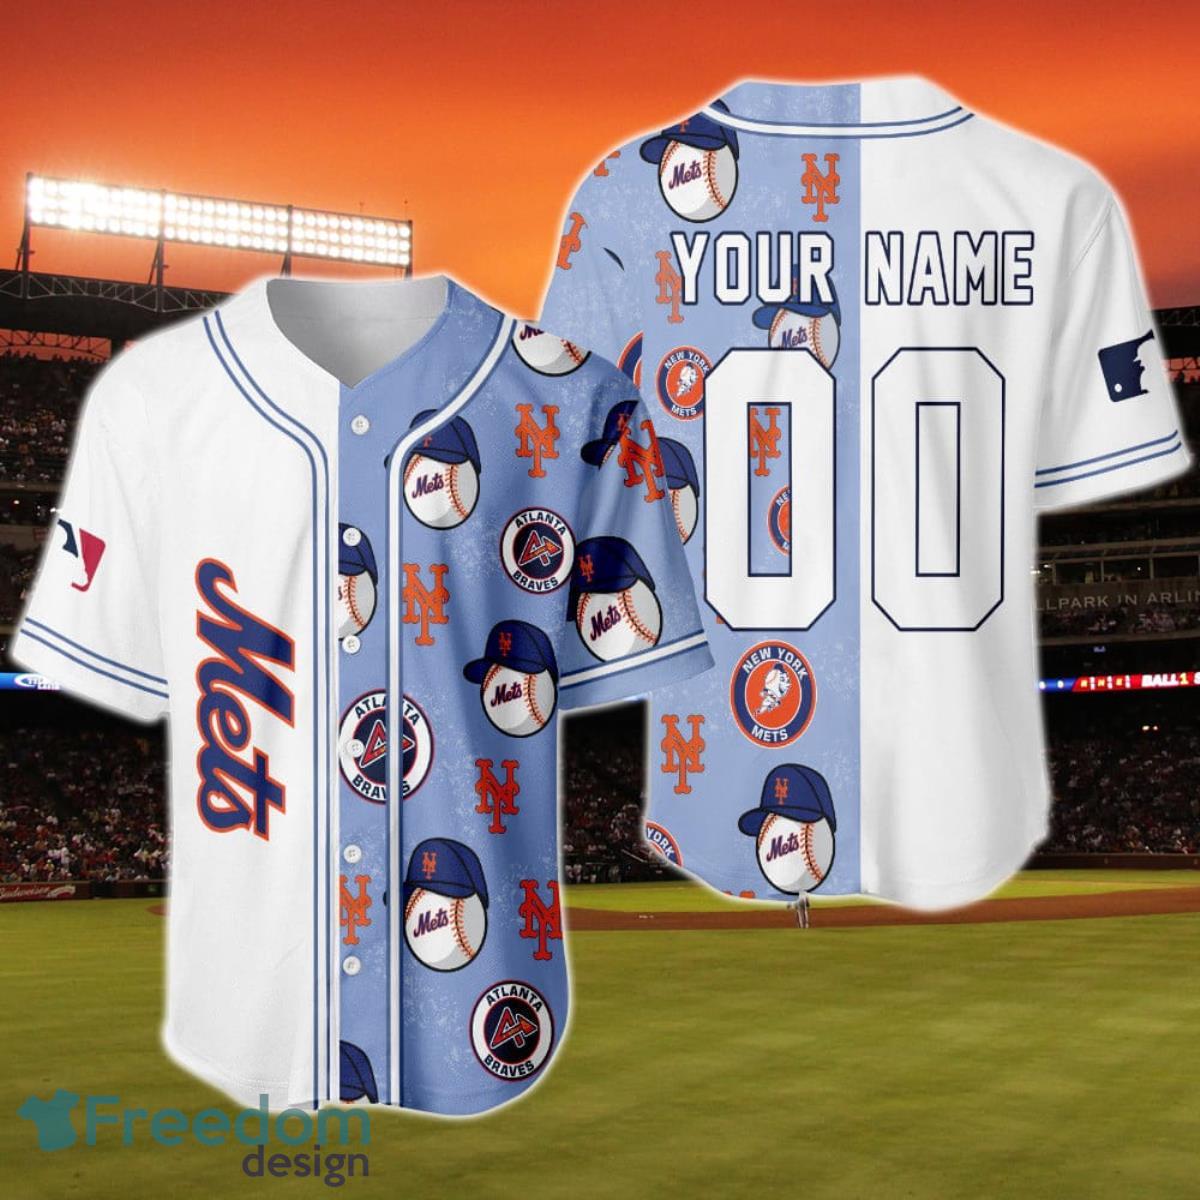 New York Mets MLB Personalized Name Number Baseball Jersey Shirt